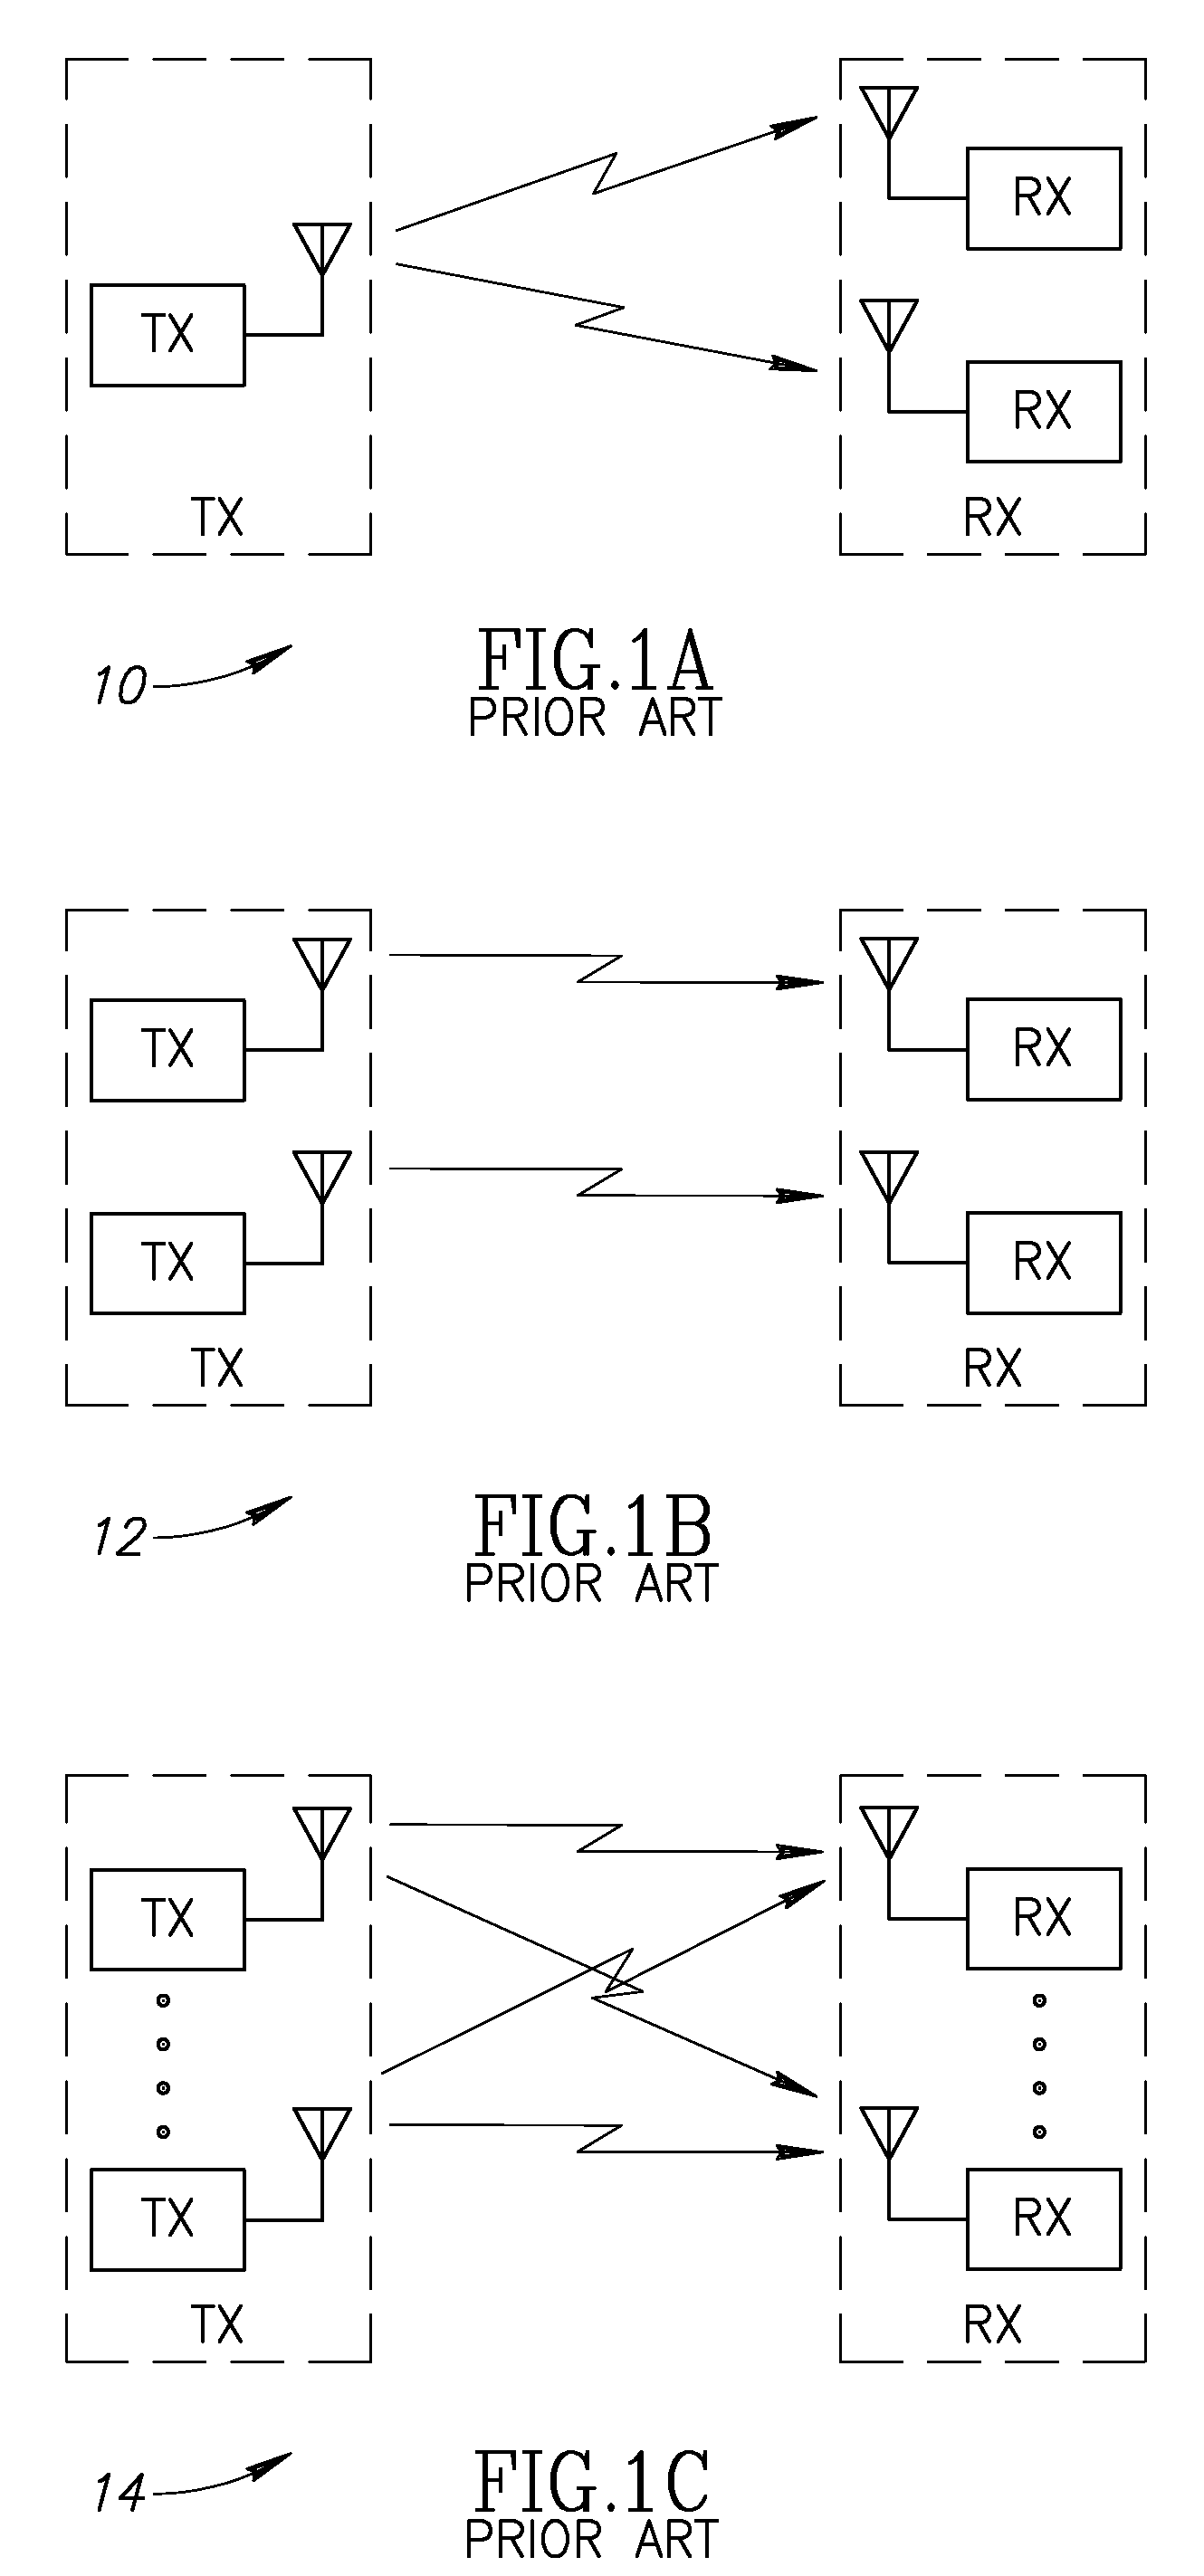 Multiple-input multiple-output (MIMO) detector incorporating efficient signal point search and soft information refinement